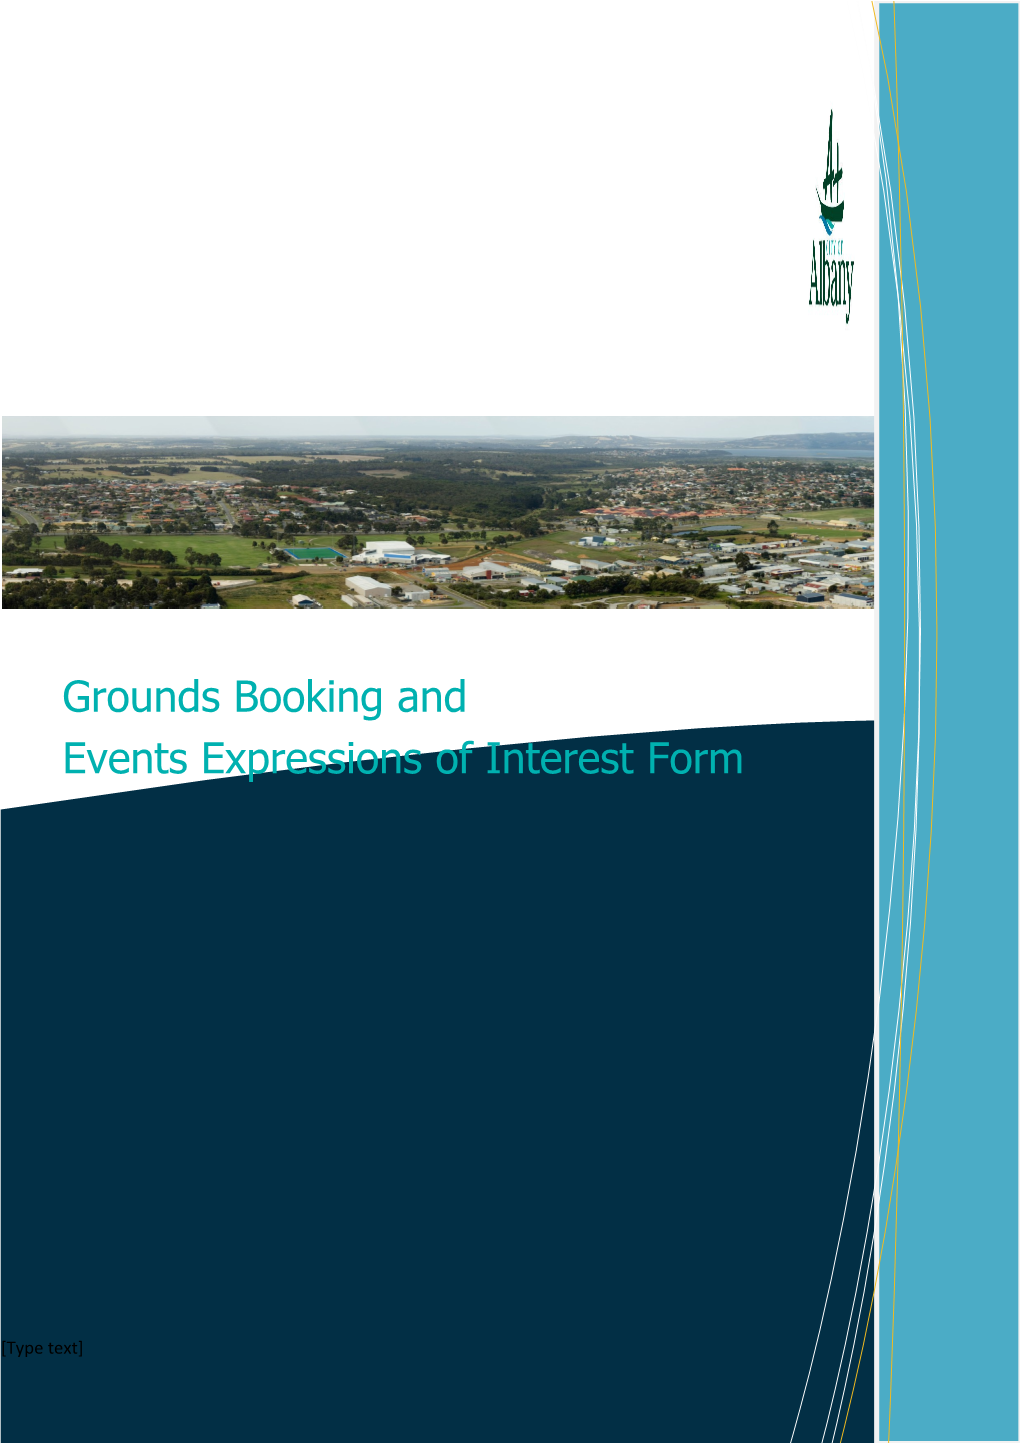 Grounds Booking and Events Expressions of Interest Form